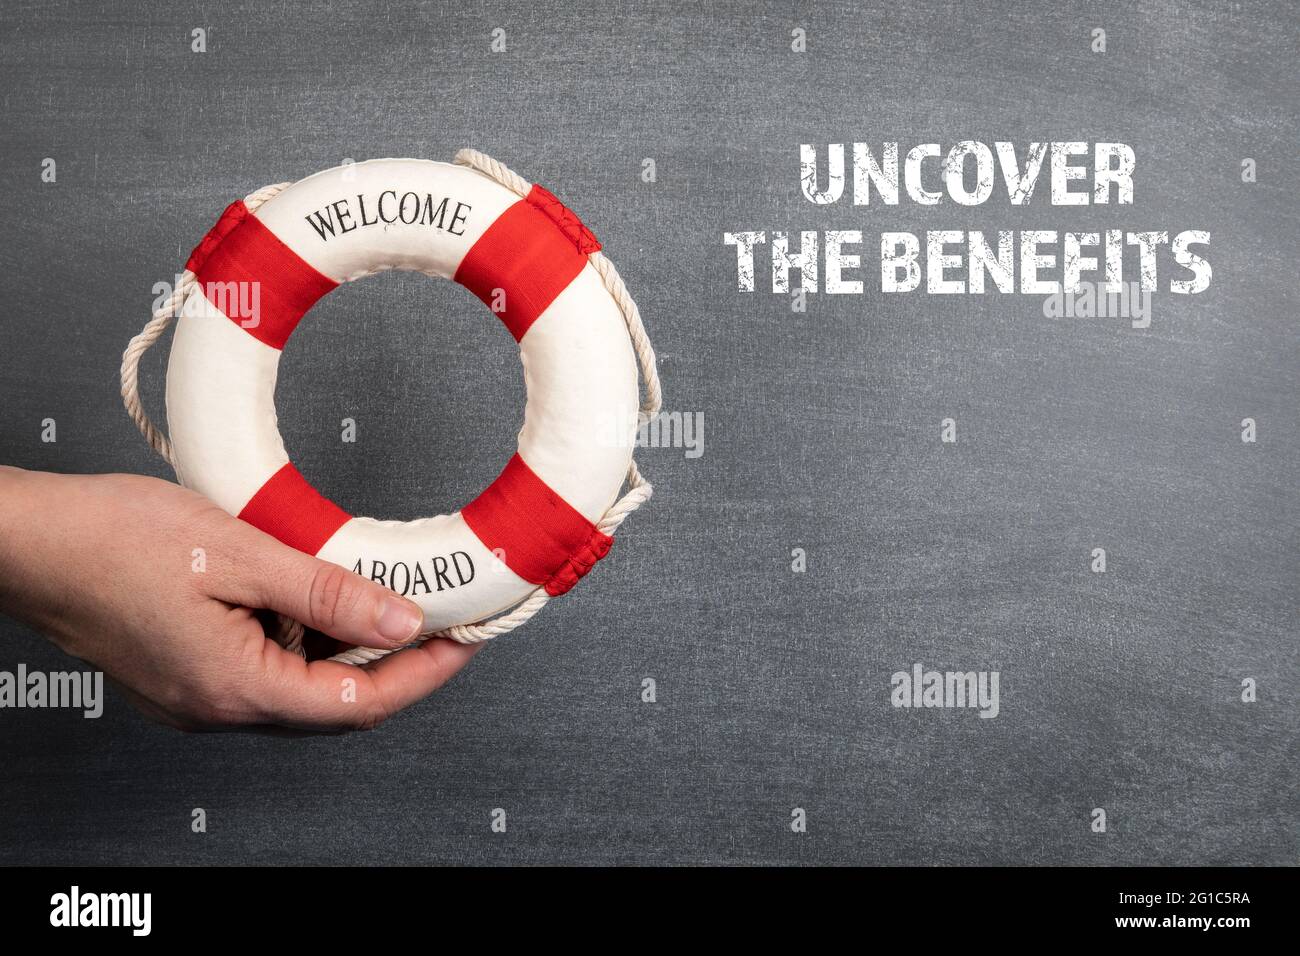 Uncover The Benefits. Black chalk board background. Stock Photo